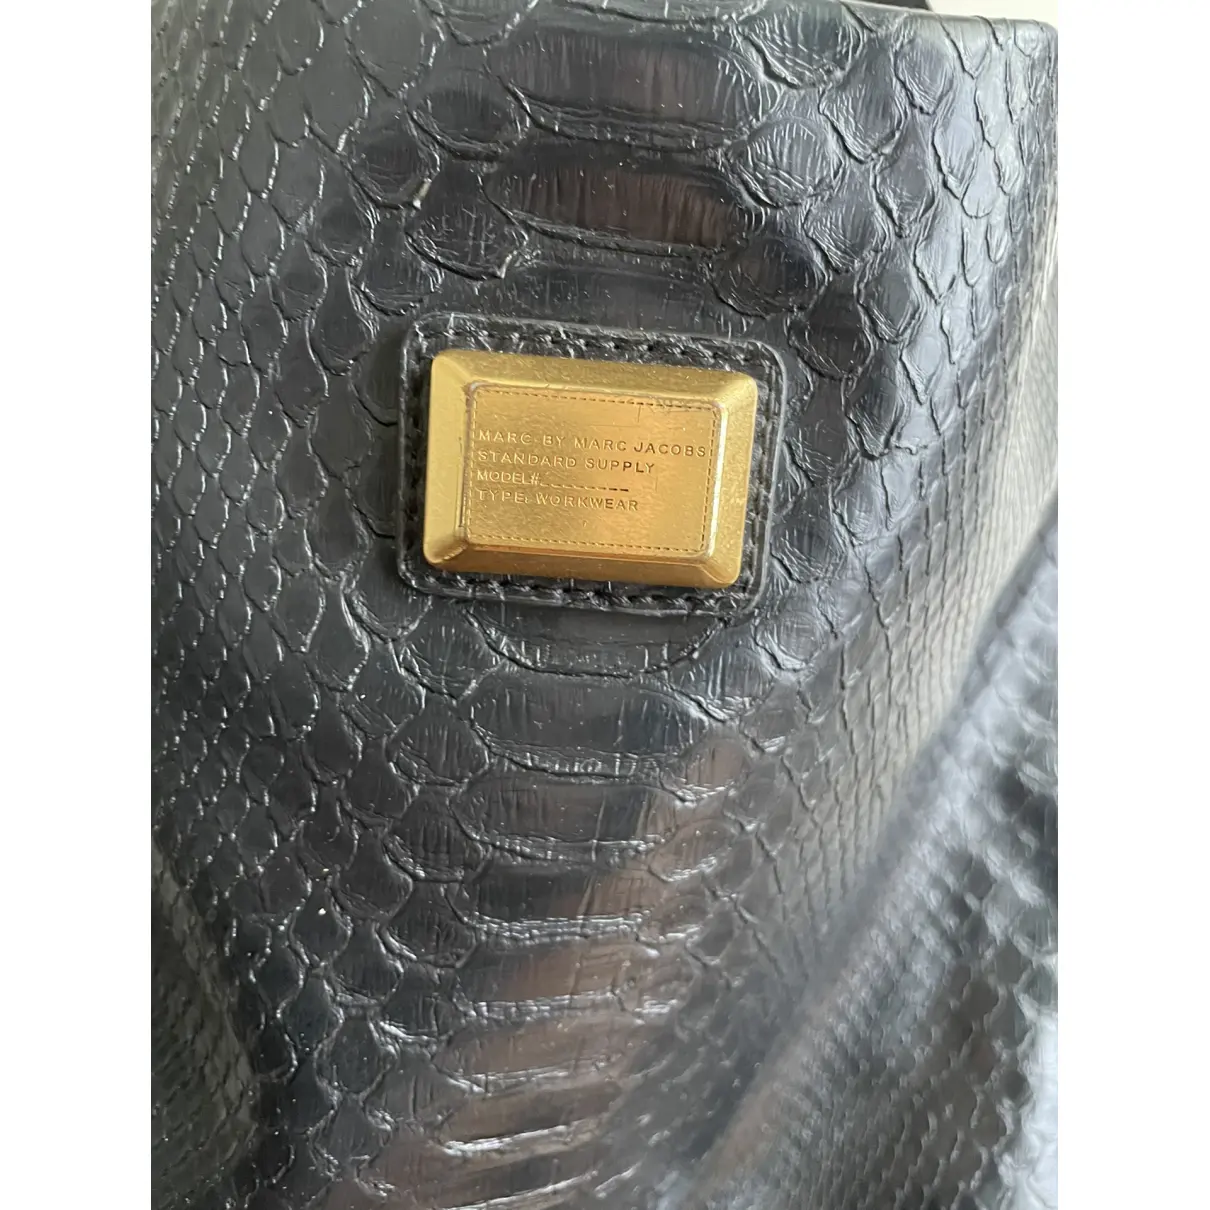 Buy Marc by Marc Jacobs Too Hot to Handle leather crossbody bag online